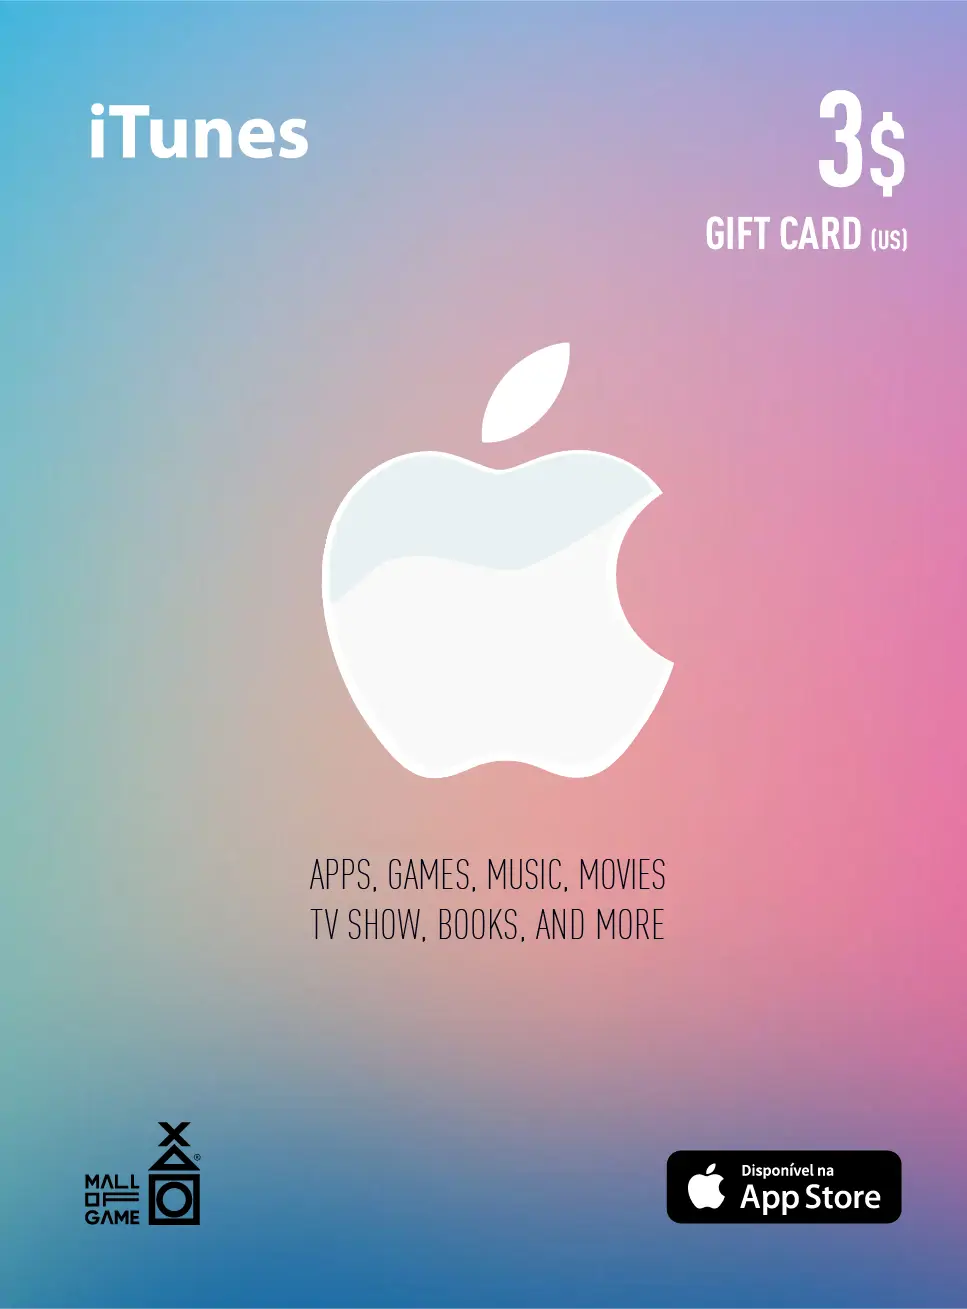  iTunes USD3 Gift Card (US)